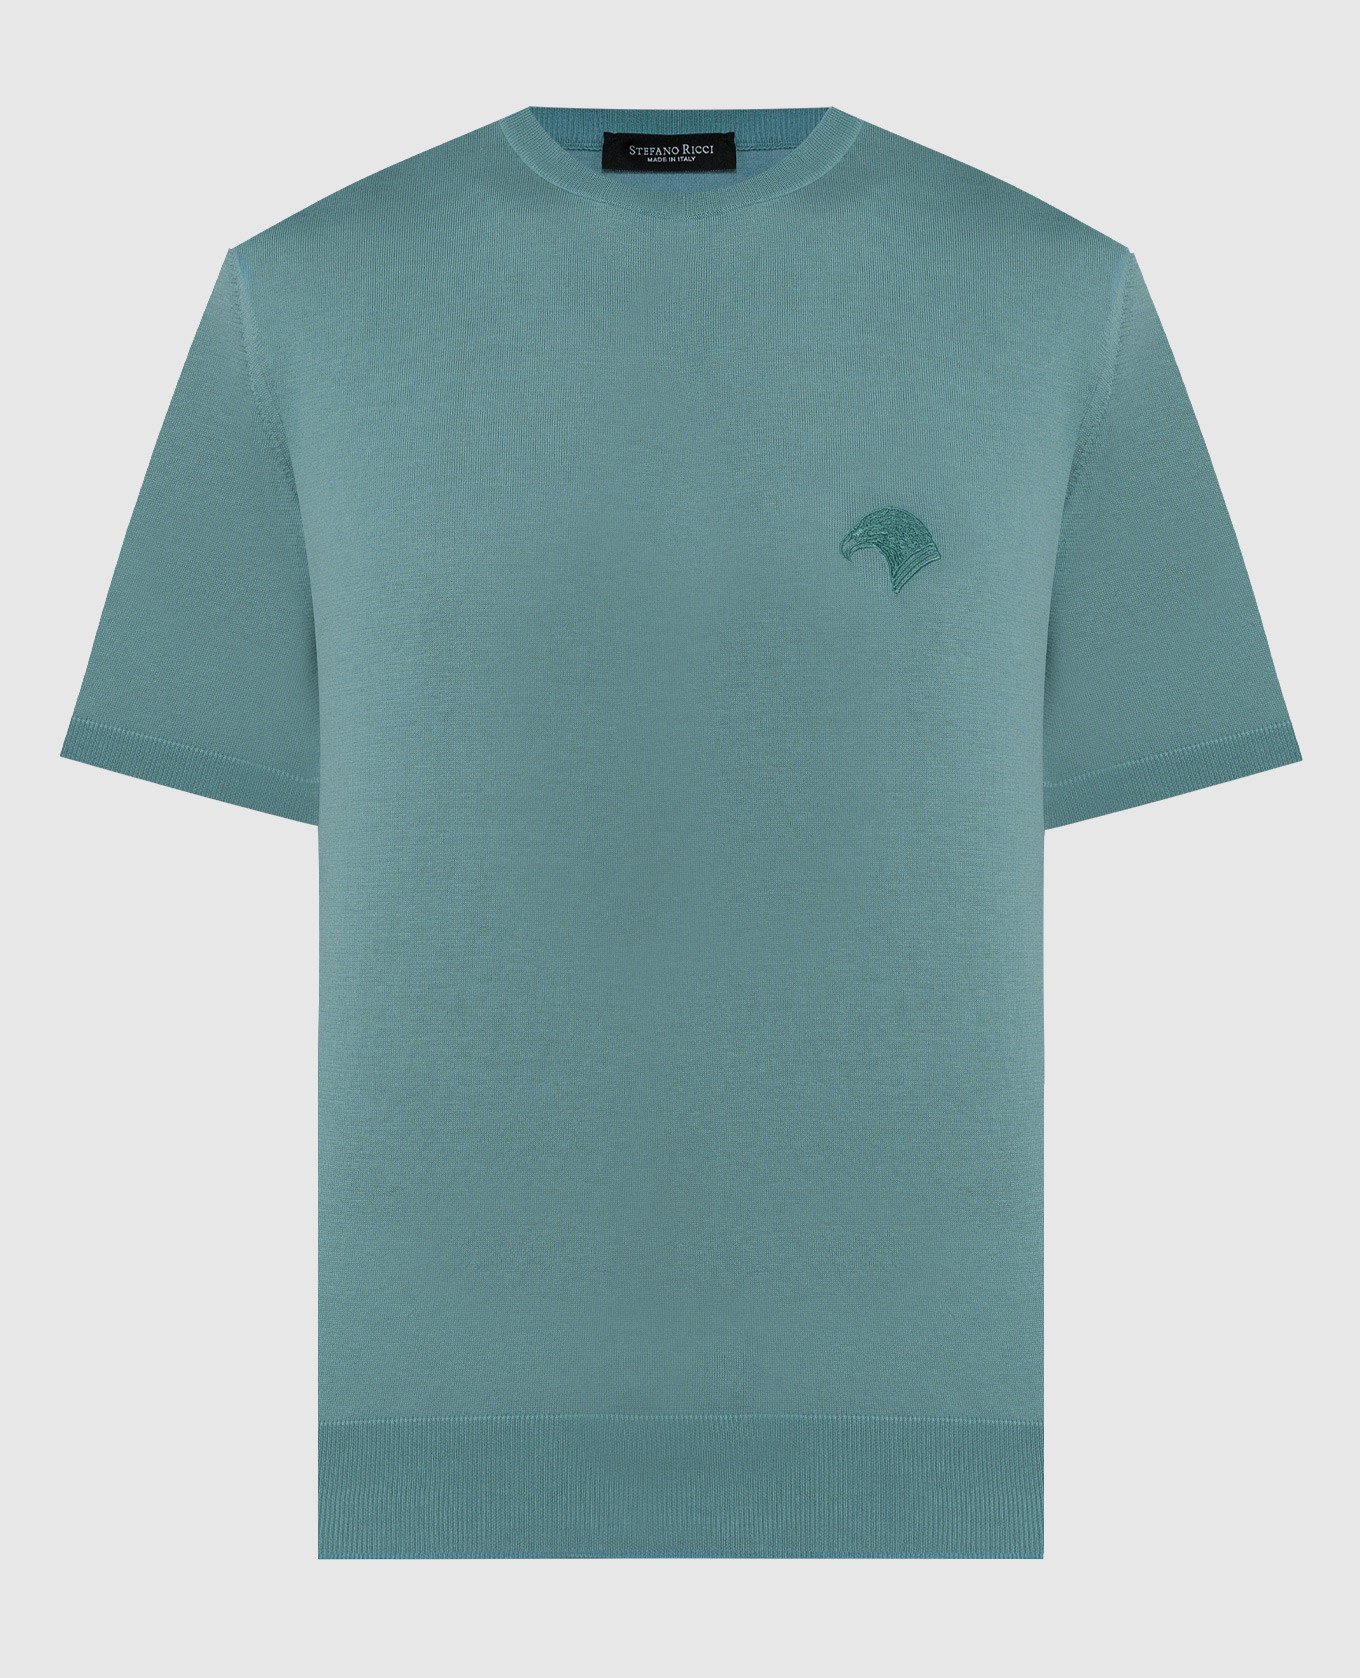 Green t-shirt with logo emblem embroidery